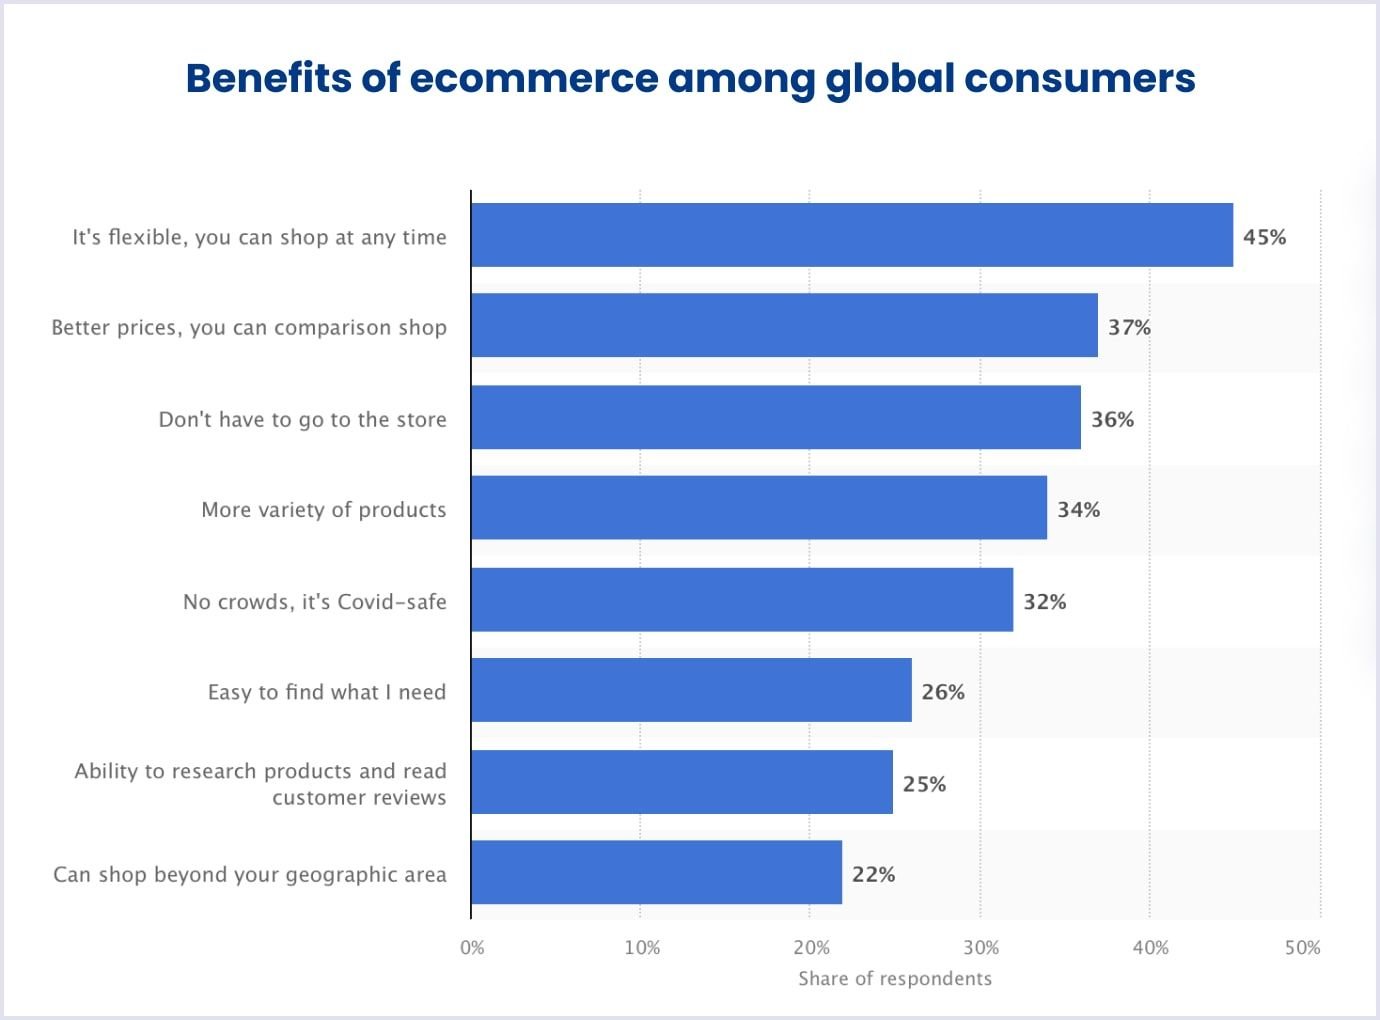 Benefits of e-commerce marketplaces among global consumers as of February 2022